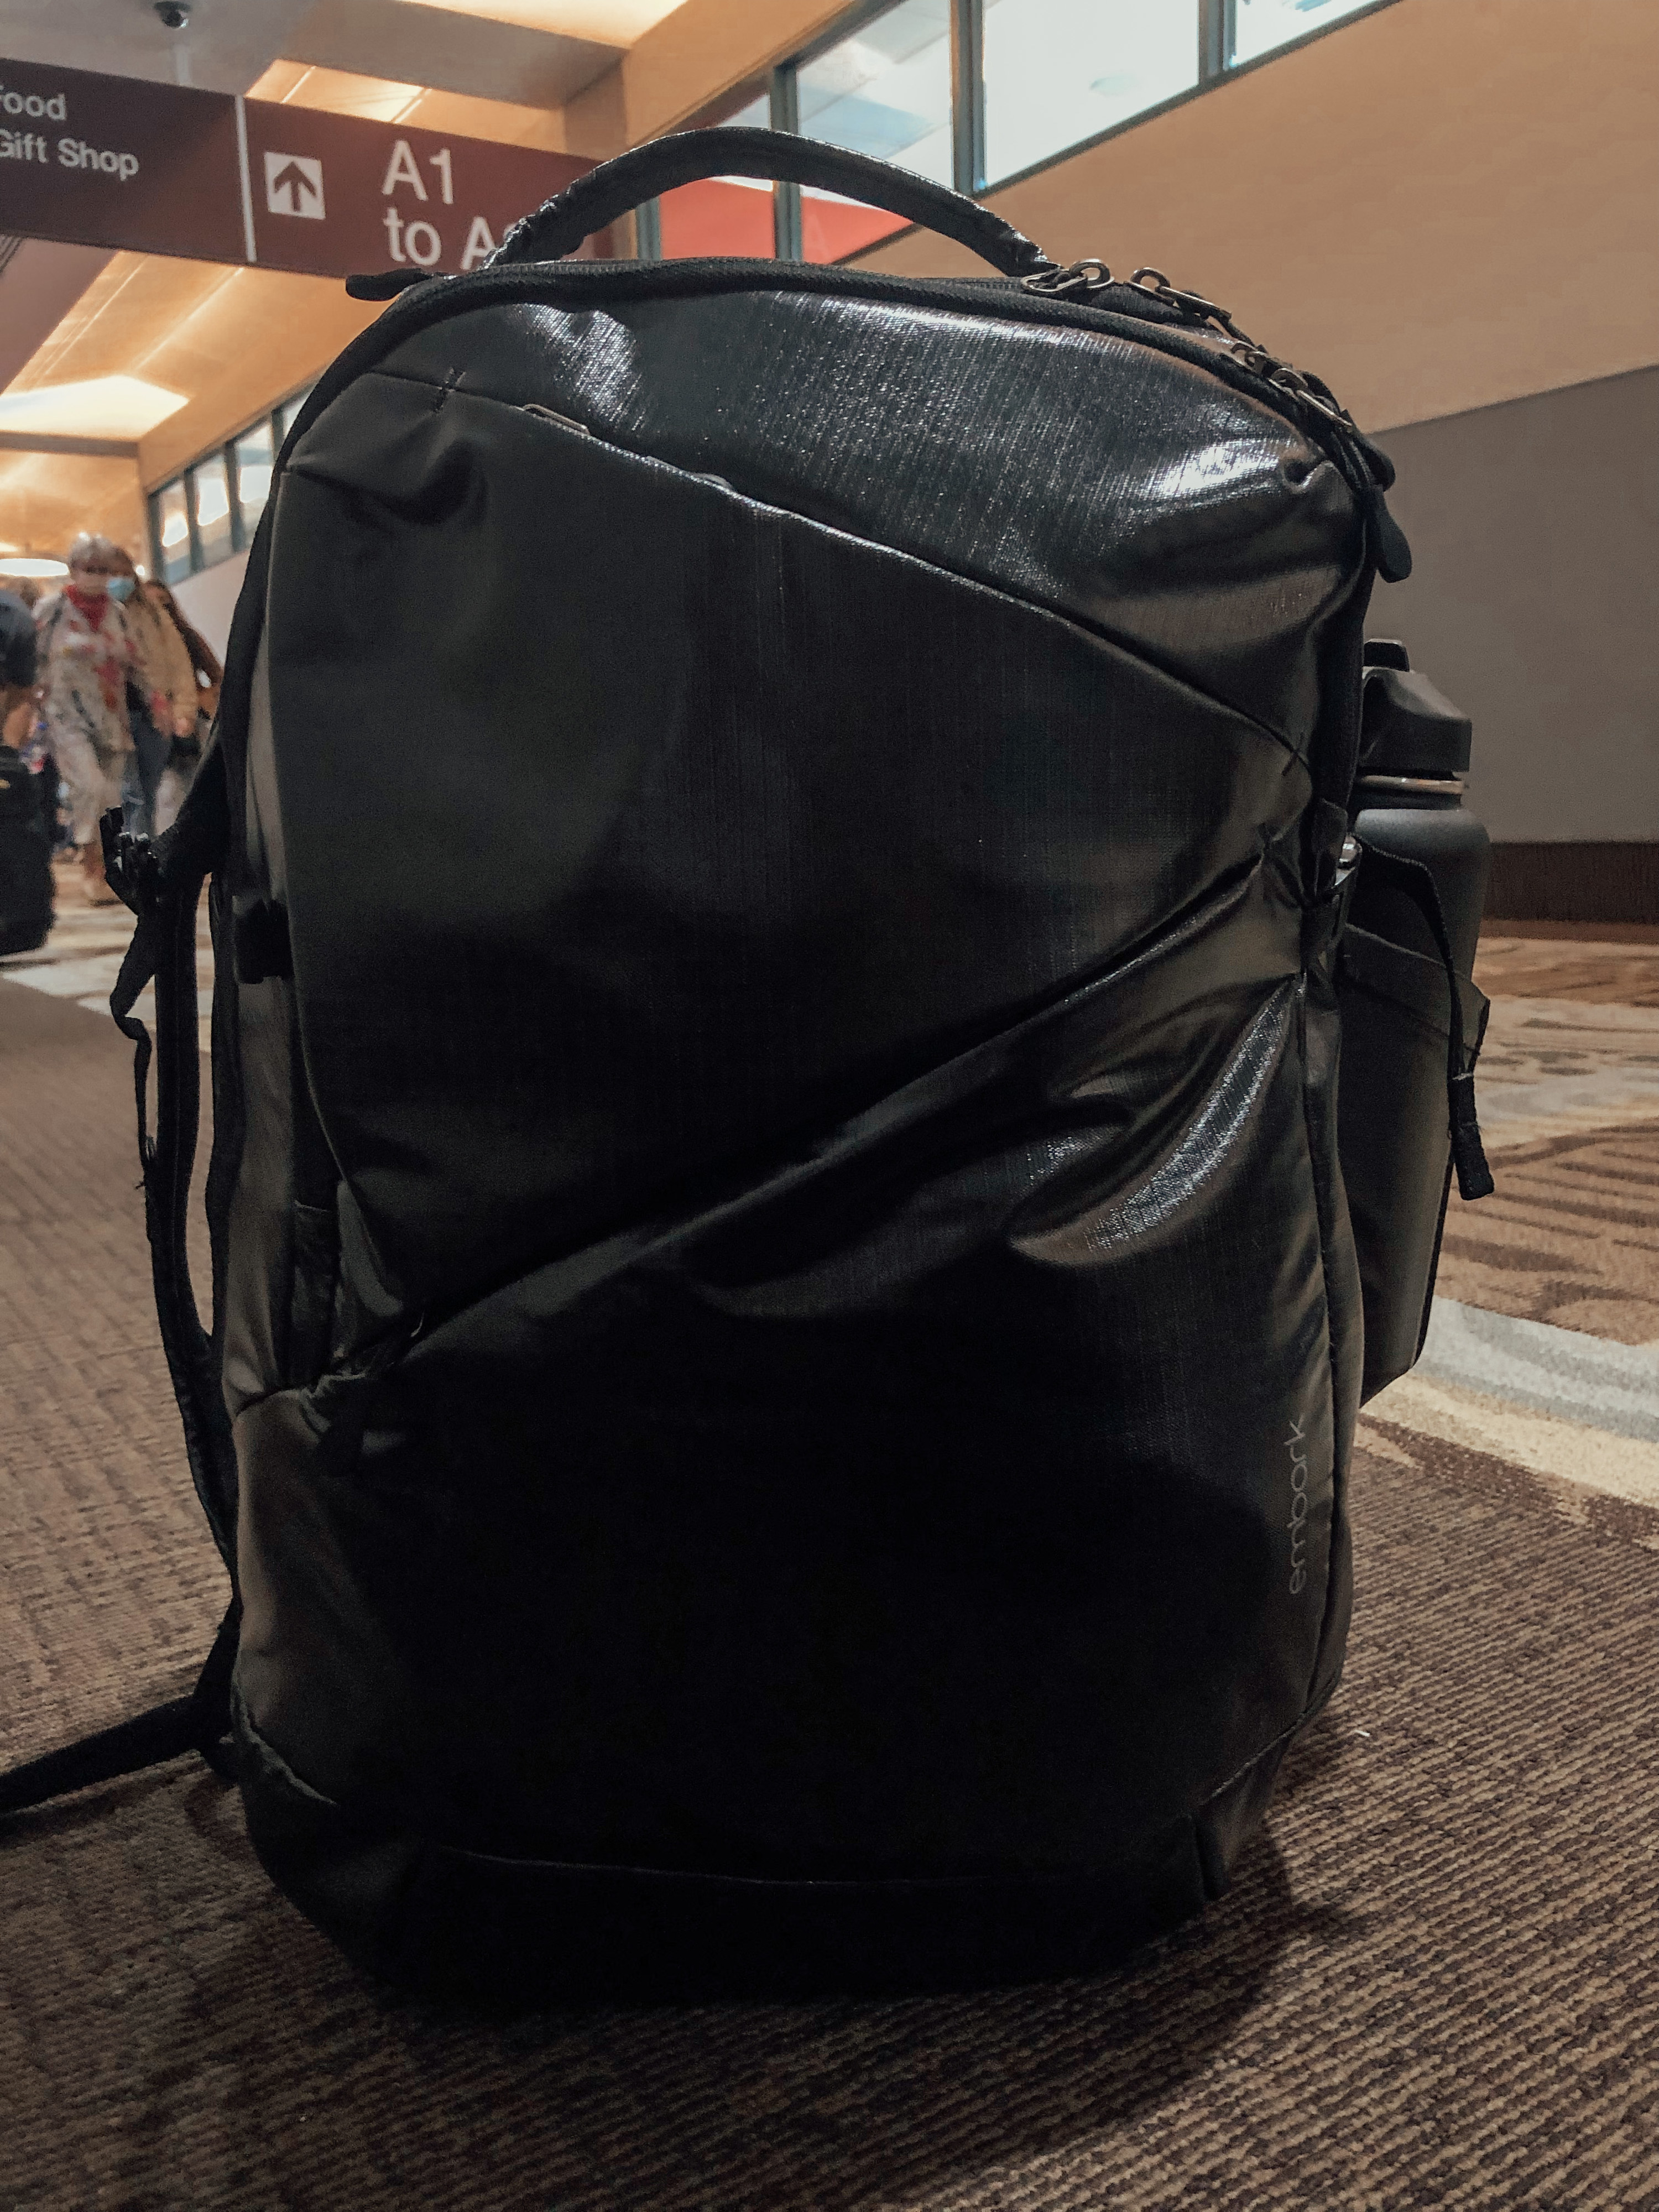 Backpack in airport